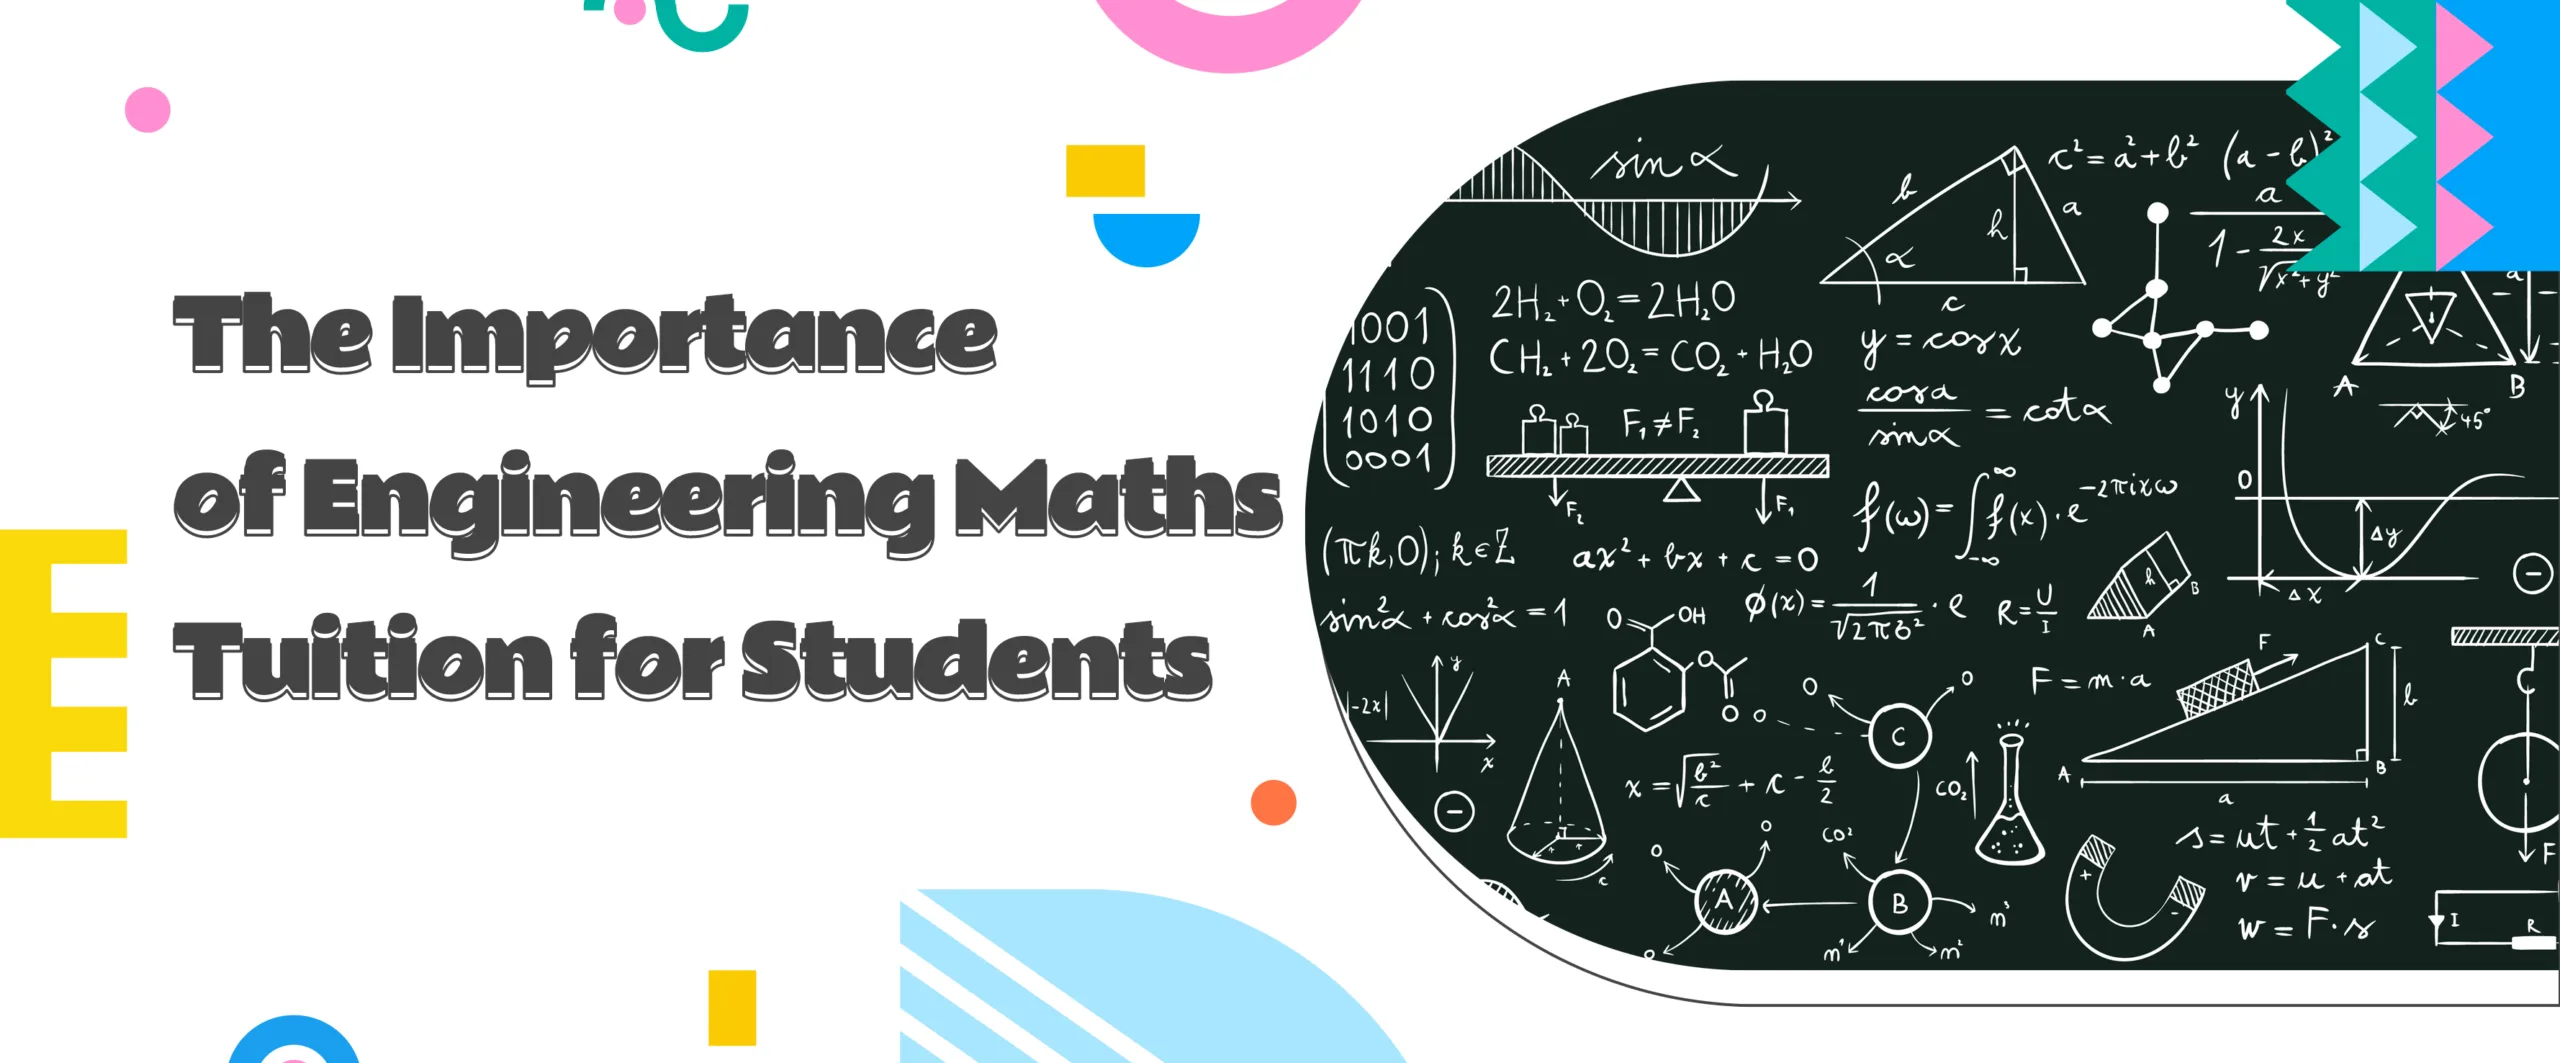 The Importance of Engineering Maths Tuition for Students